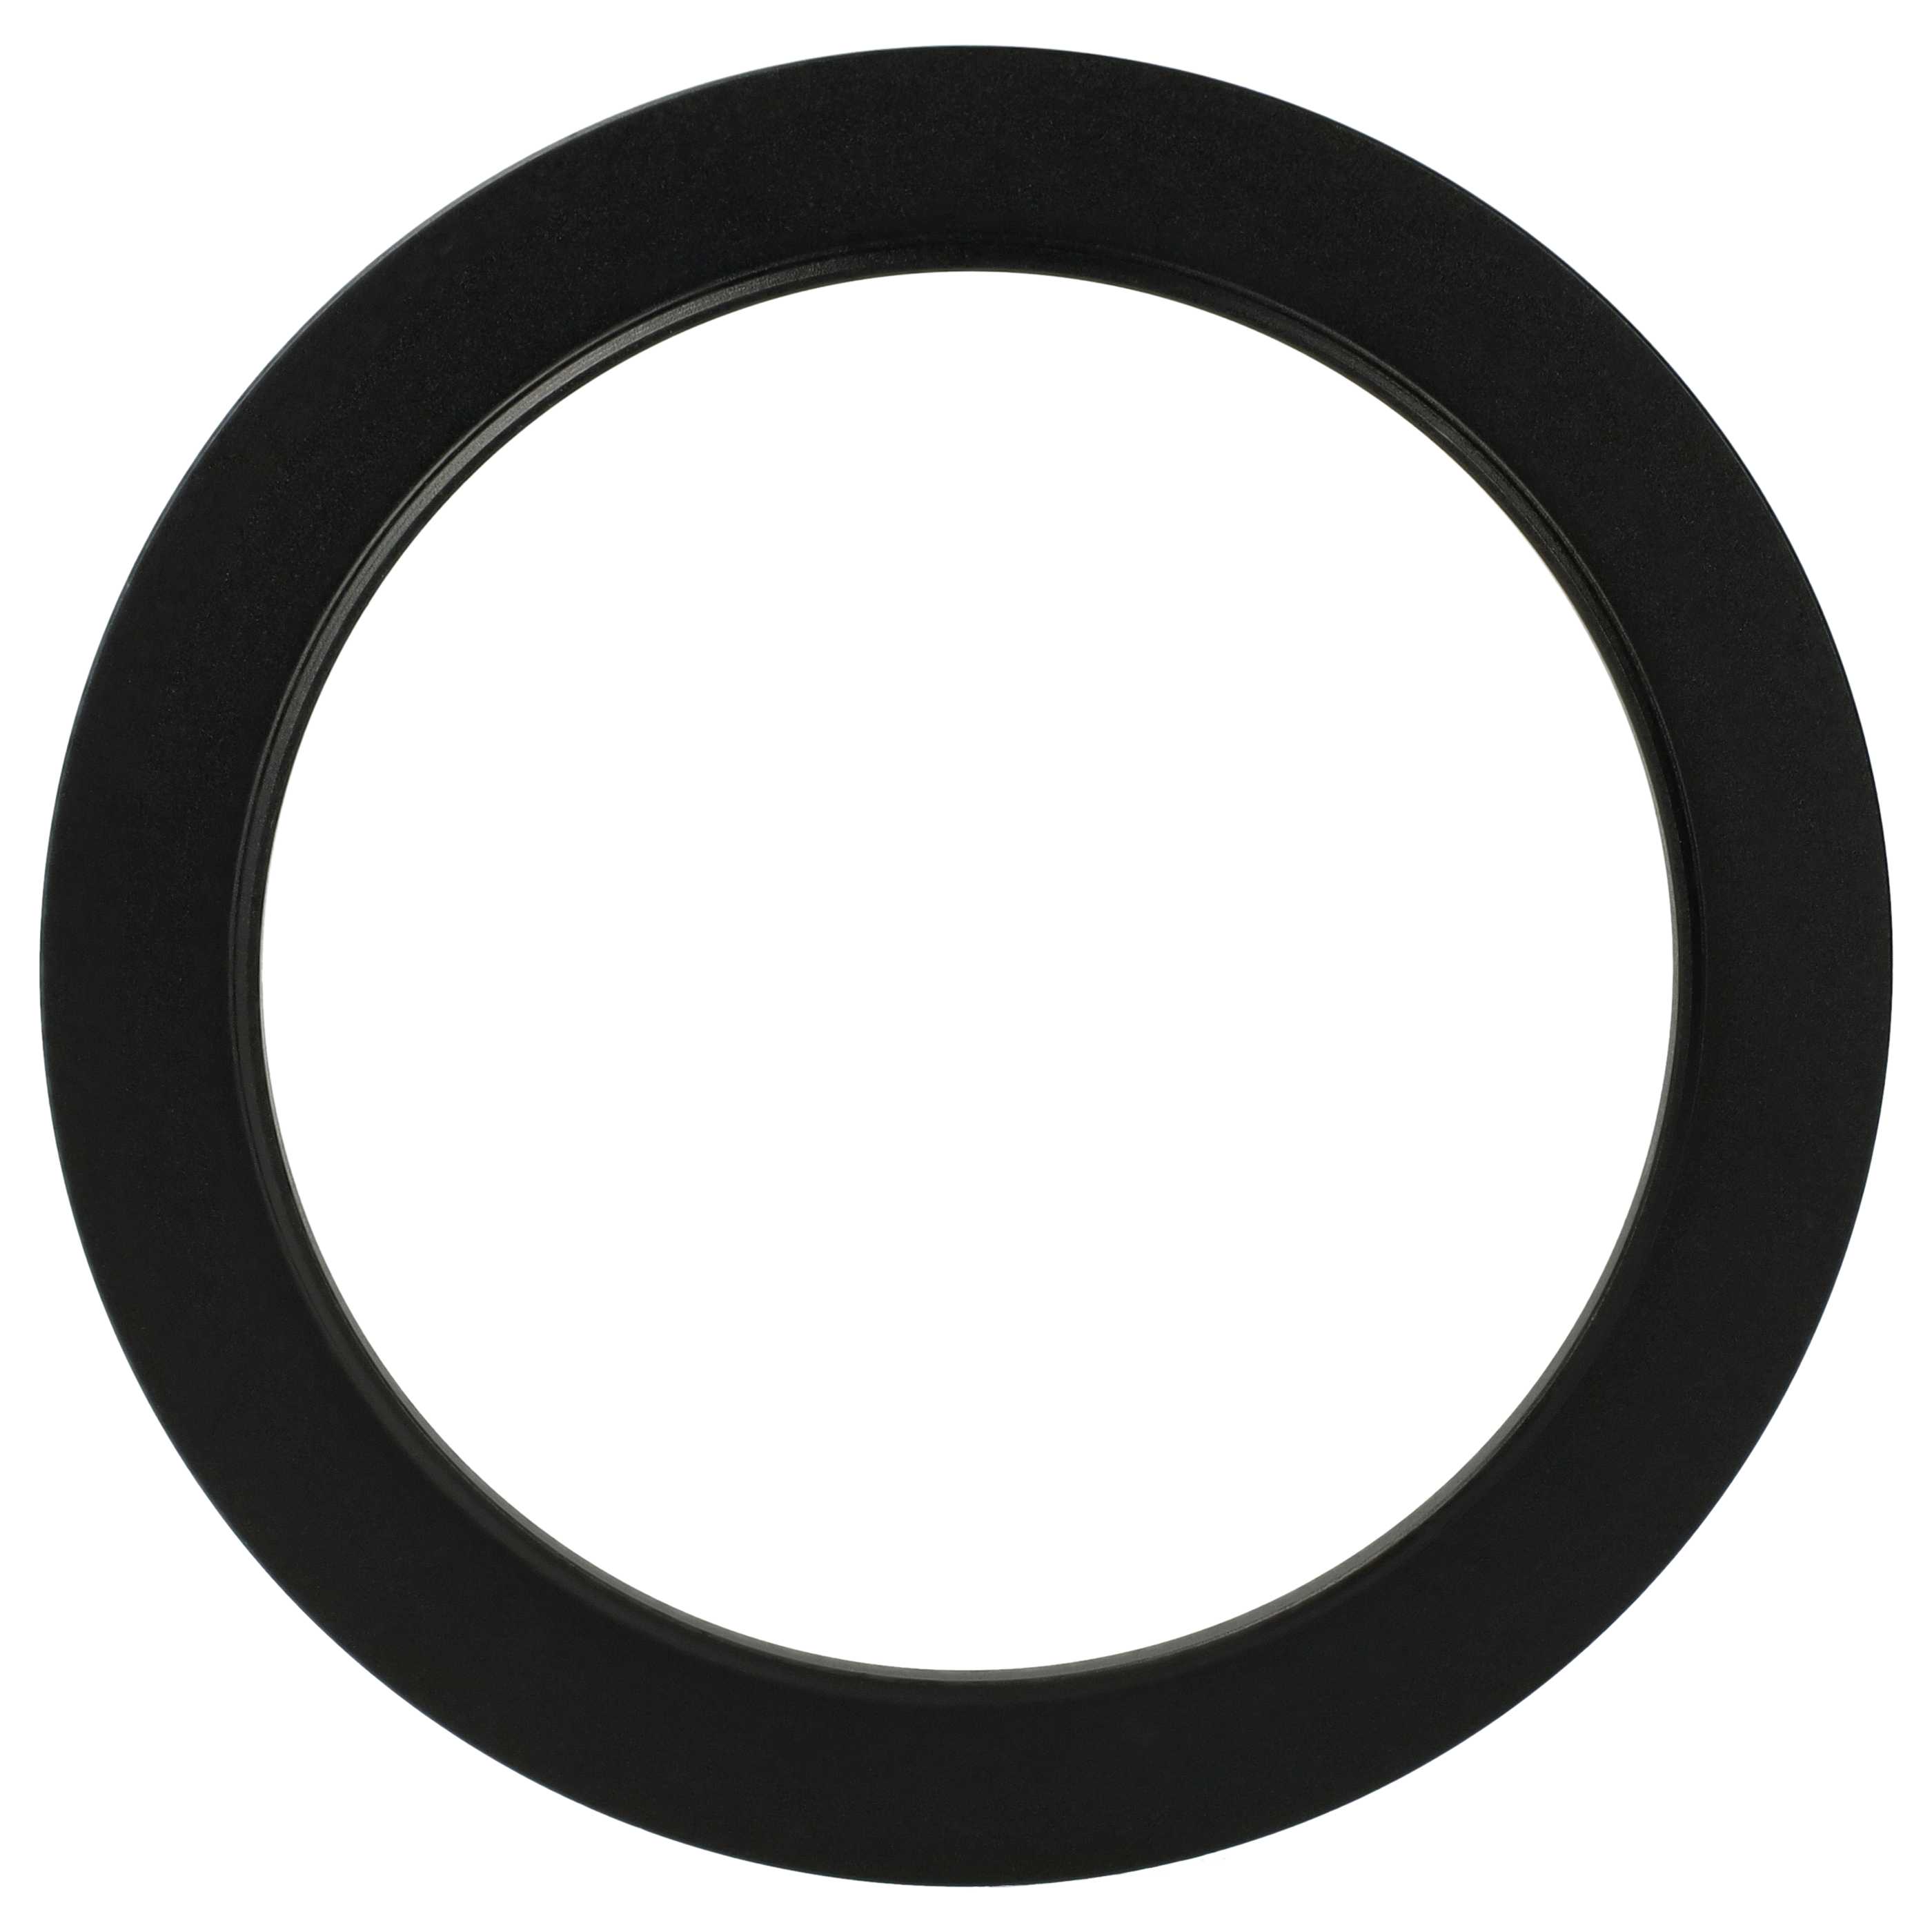 Step-Up Ring Adapter of 77 mm to 95 mmfor various Camera Lens - Filter Adapter